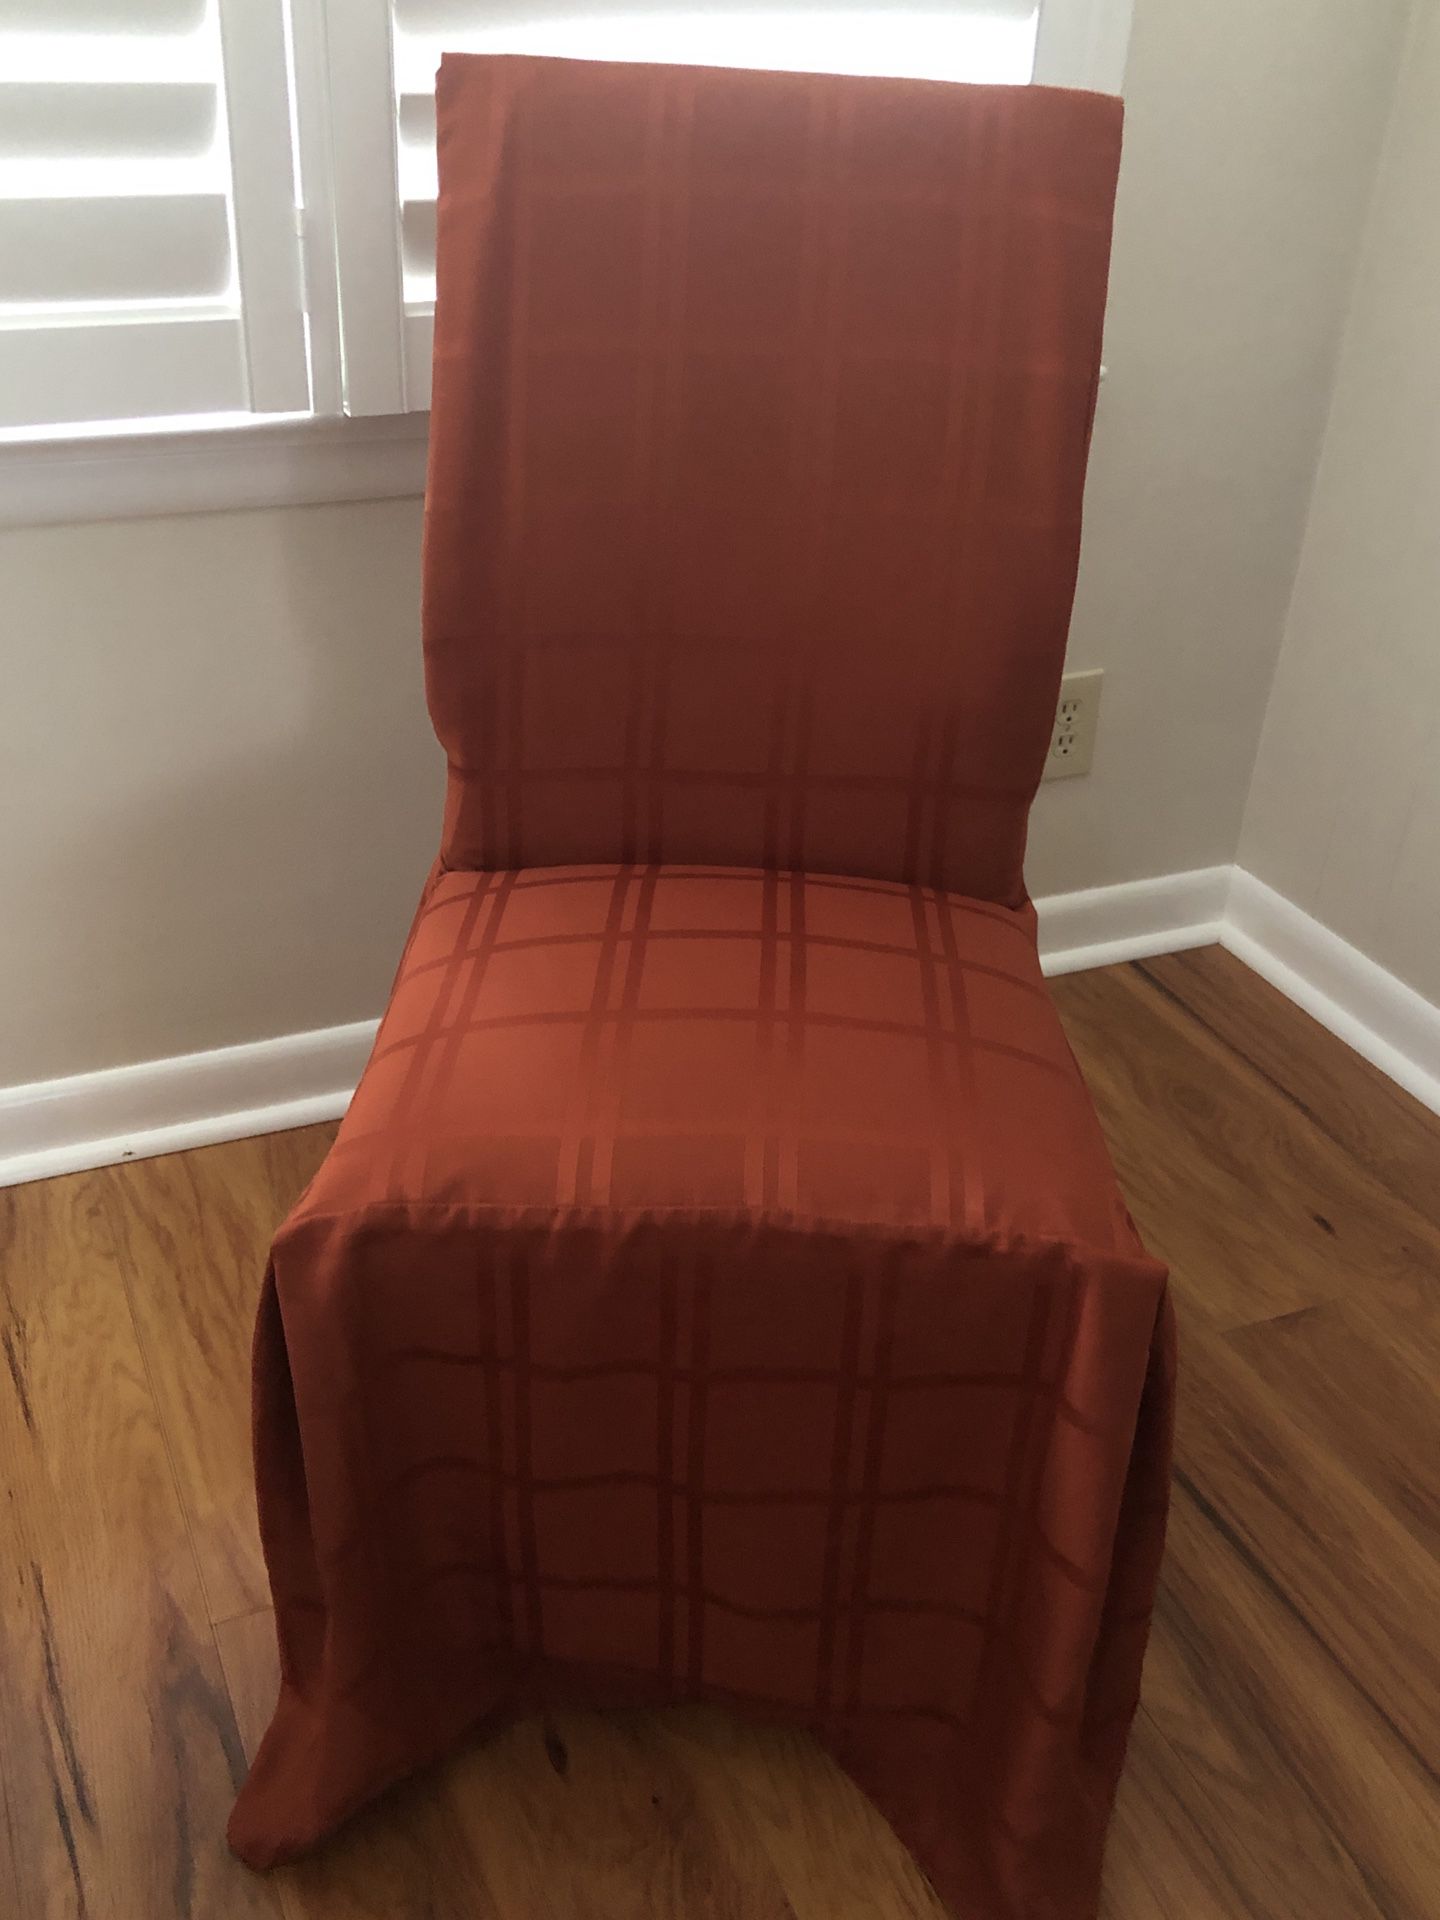 Dining room chair cover